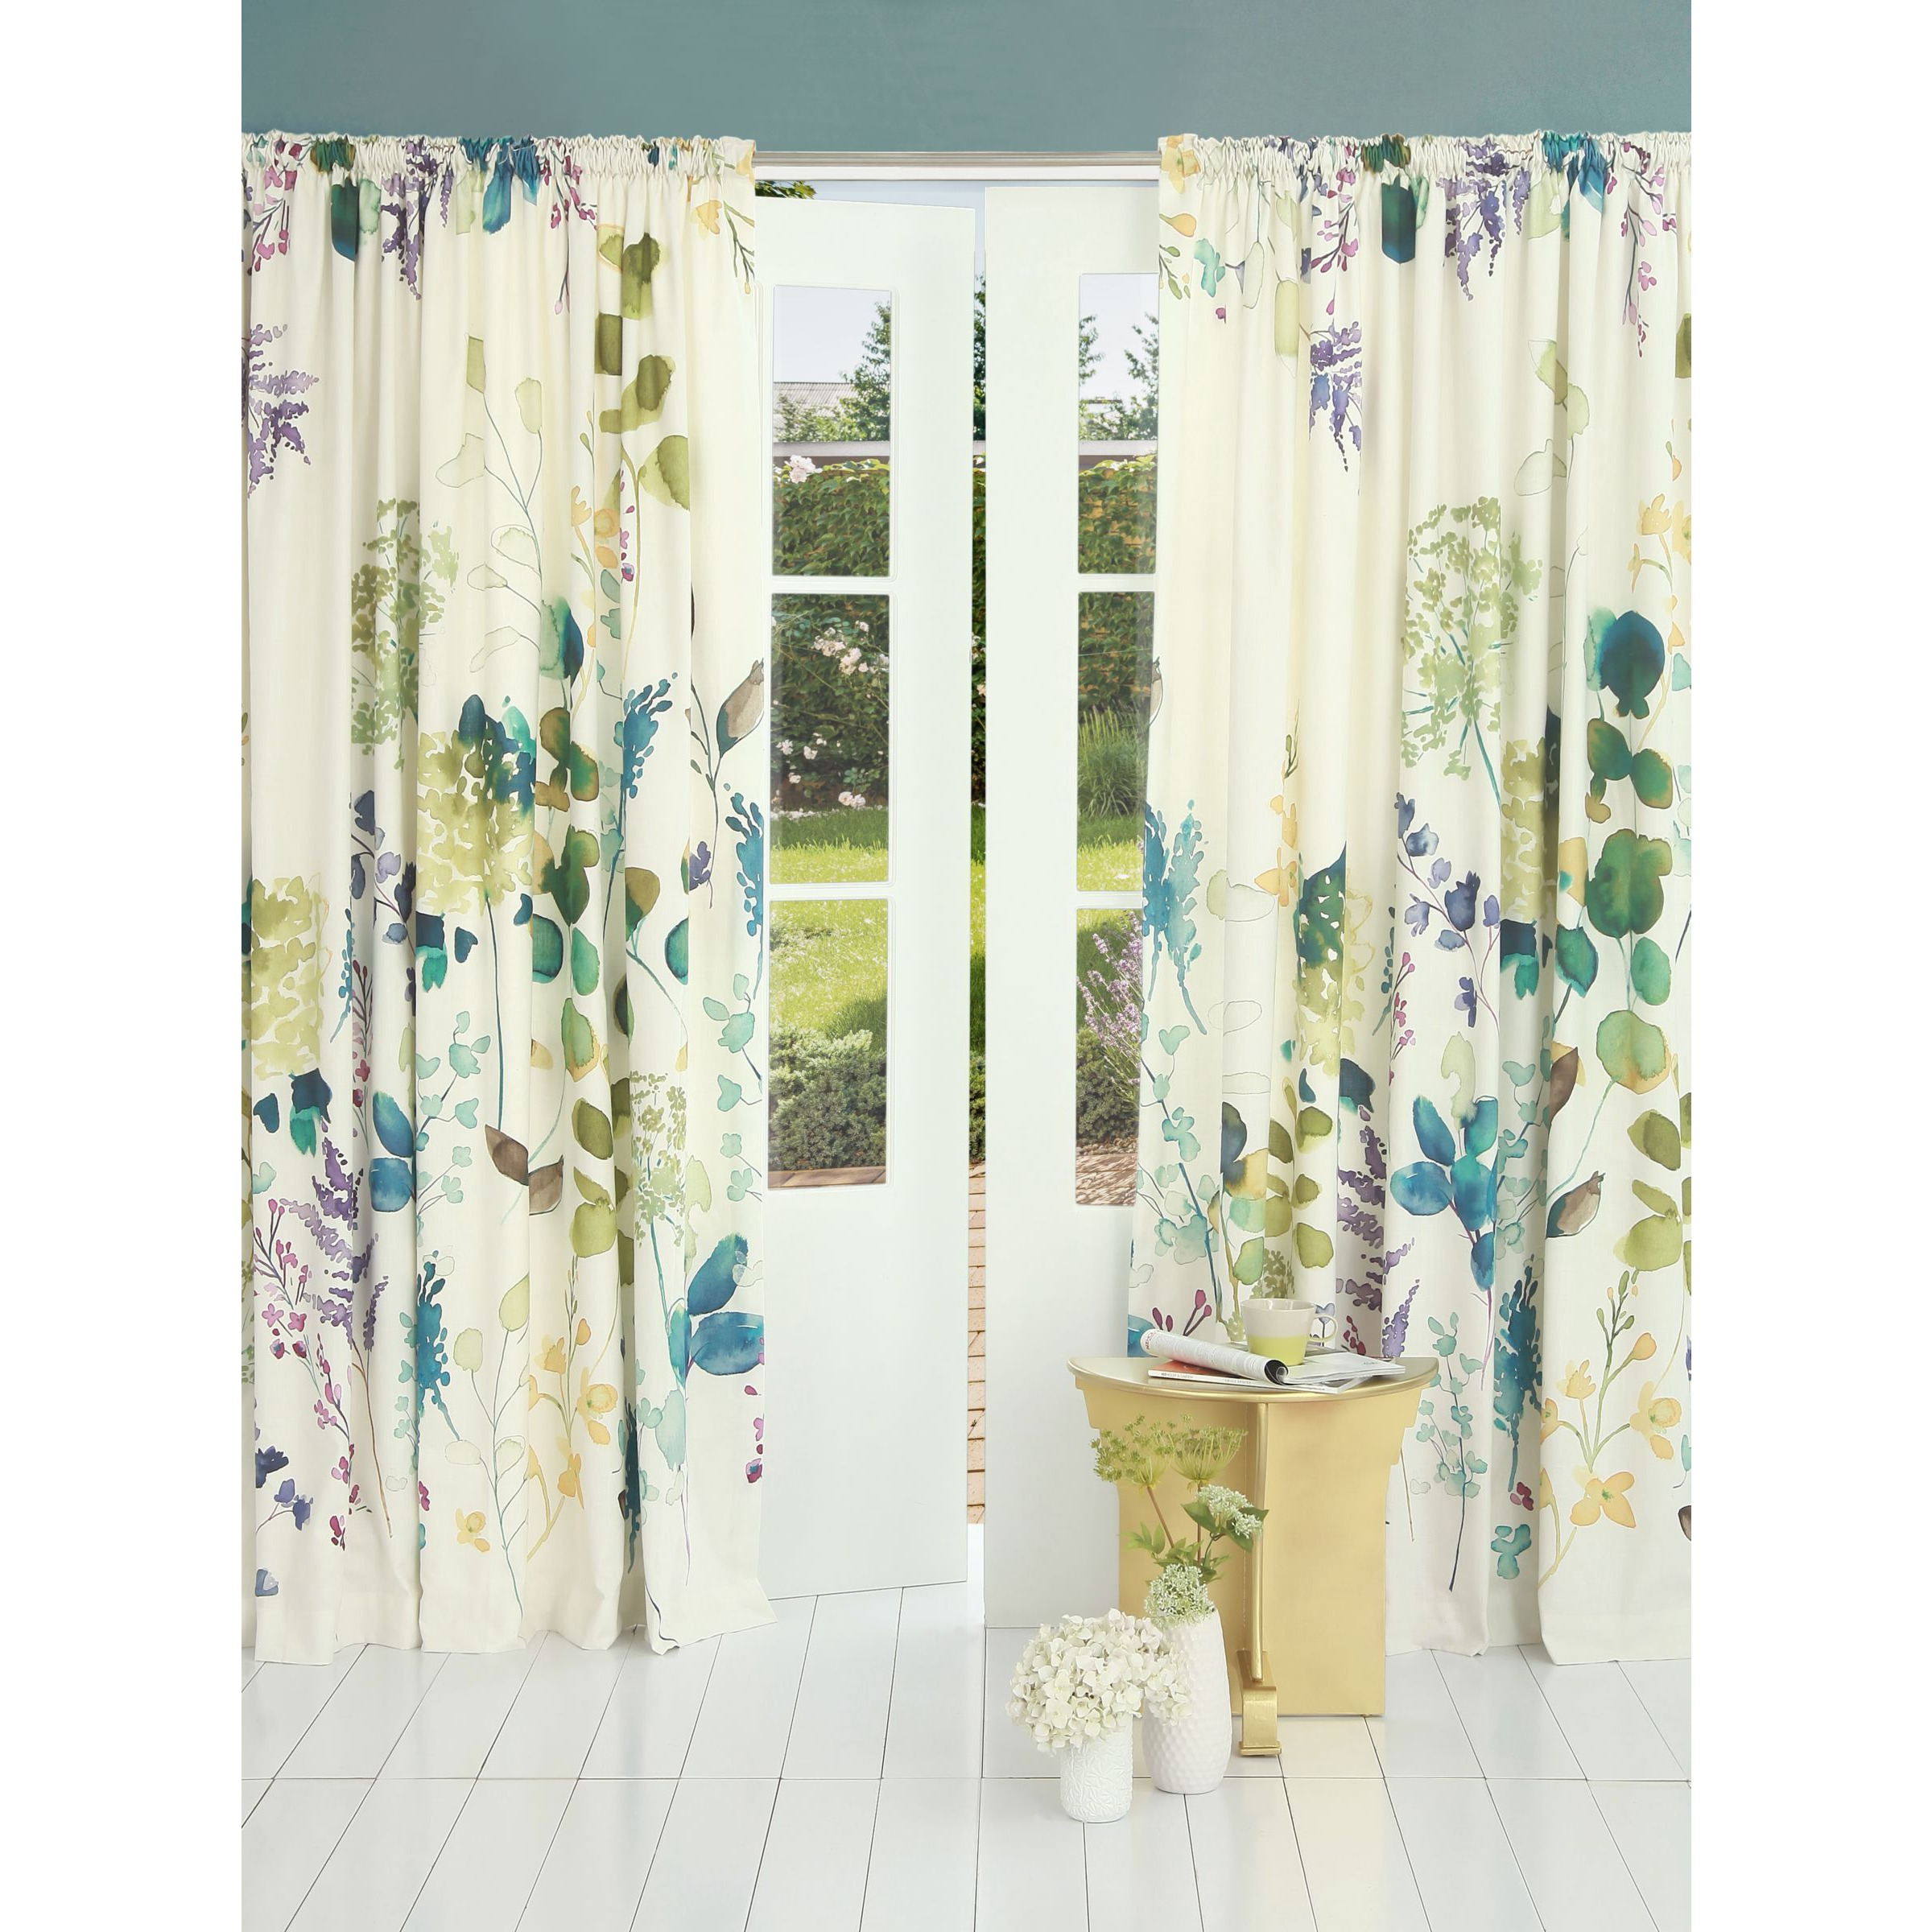 bluebellgray Botanical Pair Blackout/Thermal Lined Pencil Pleat Curtains, Multi - image 1